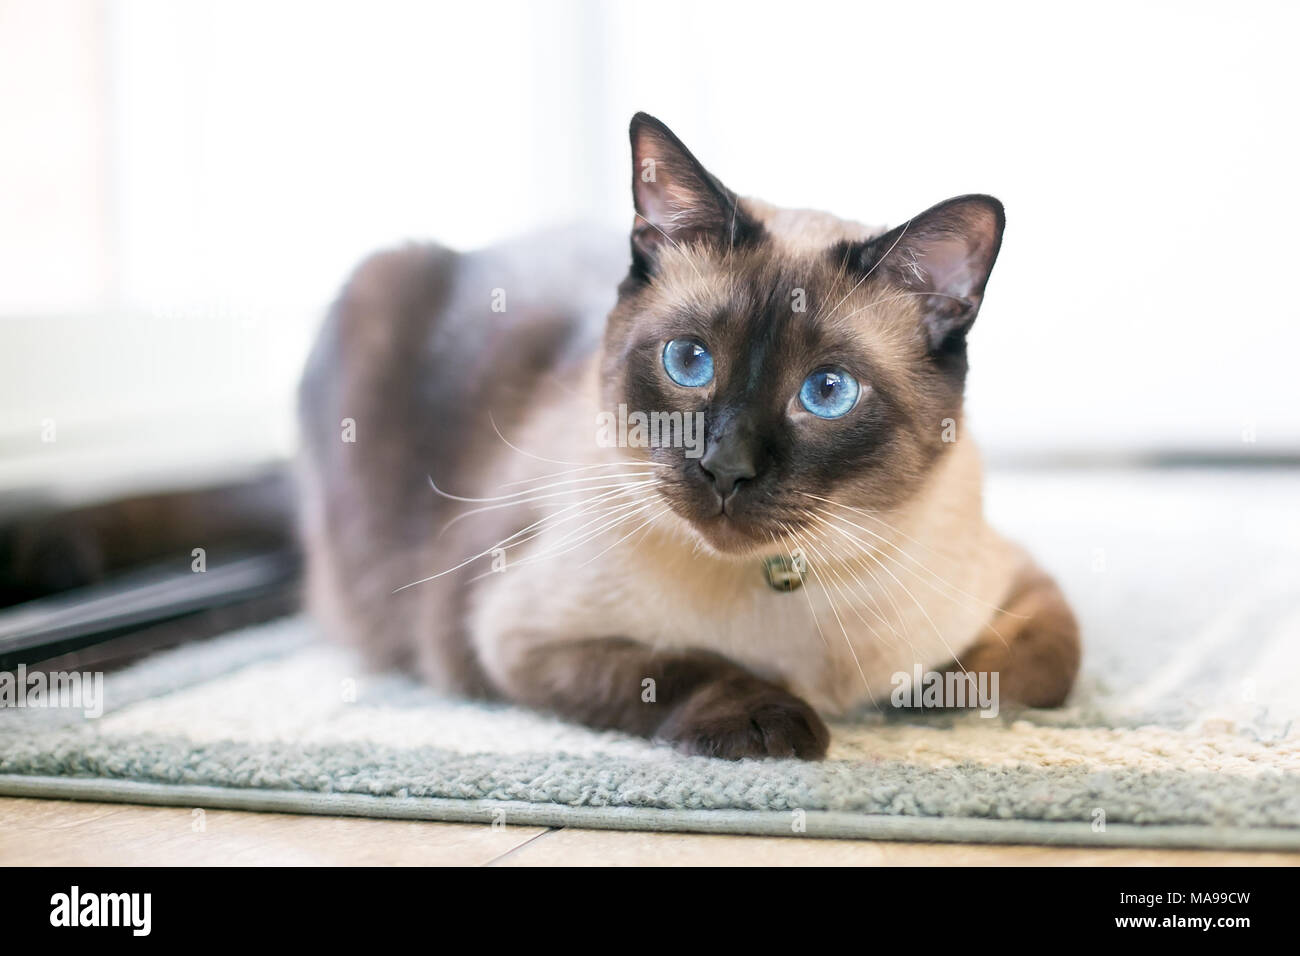 A purebred Siamese cat with seal point markings and blue eyes Stock Photo